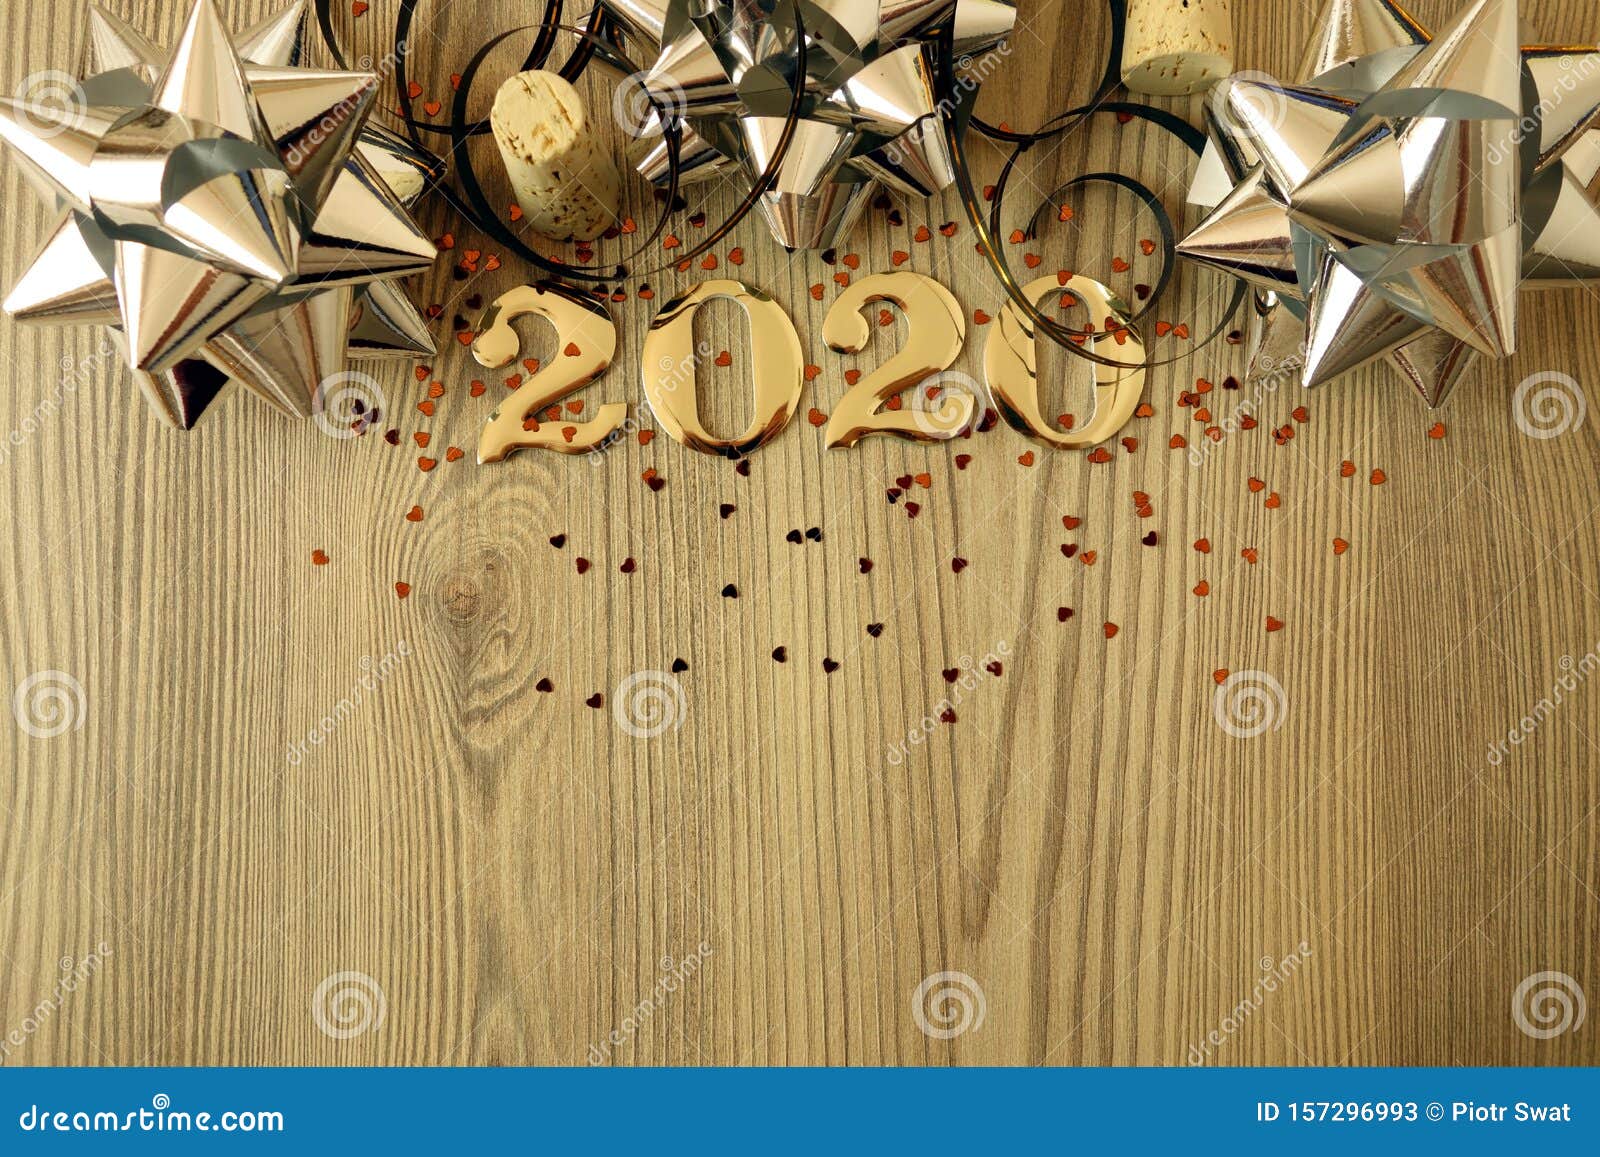 Happy New Year 2020 Greeting Card Design Template Stock ...